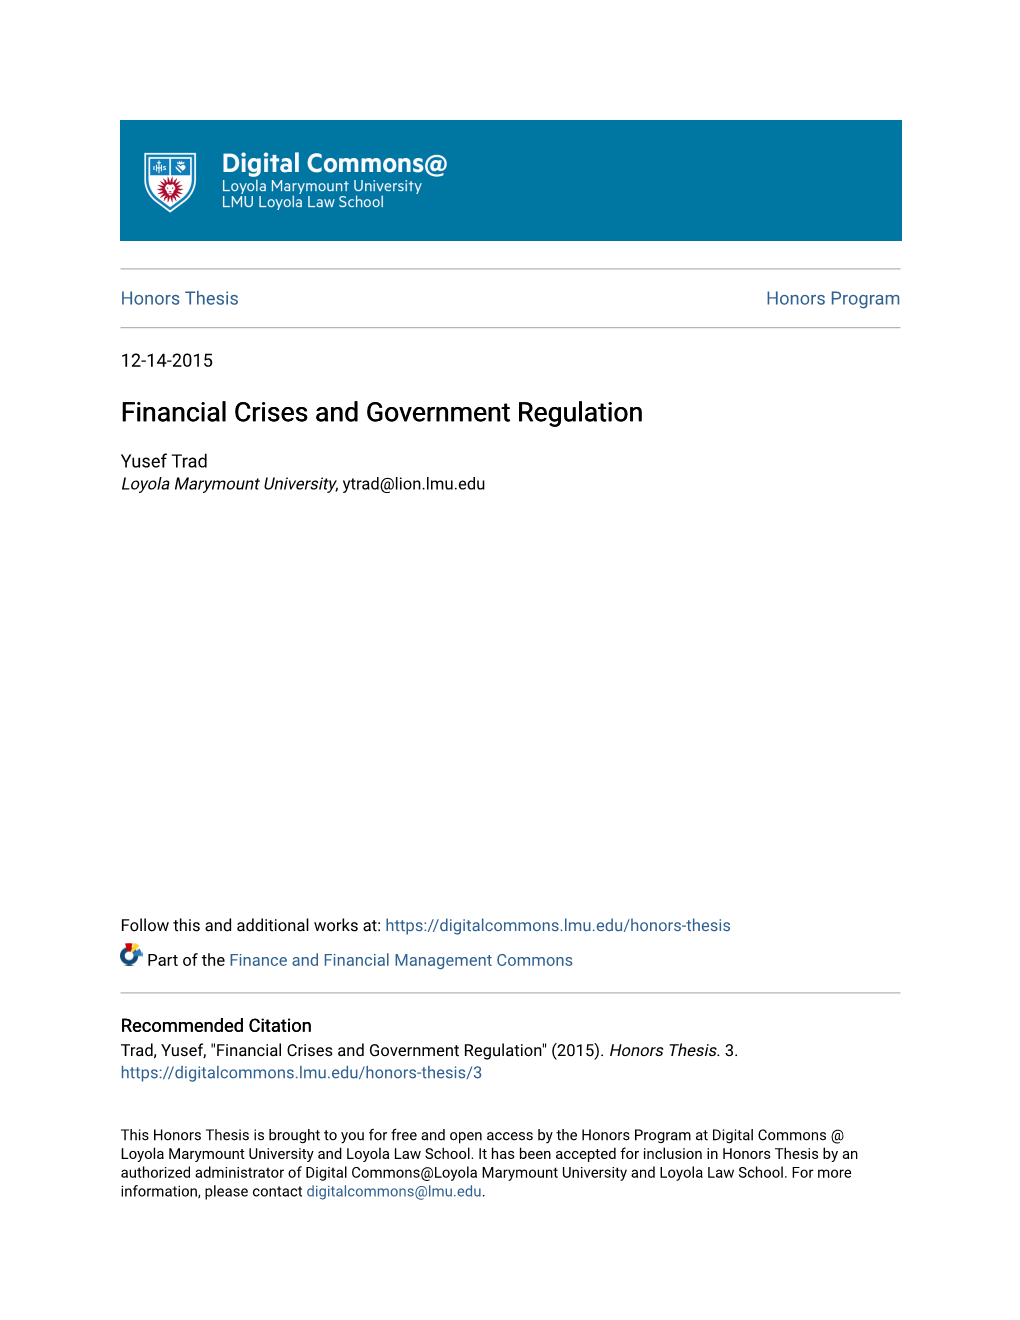 Financial Crises and Government Regulation